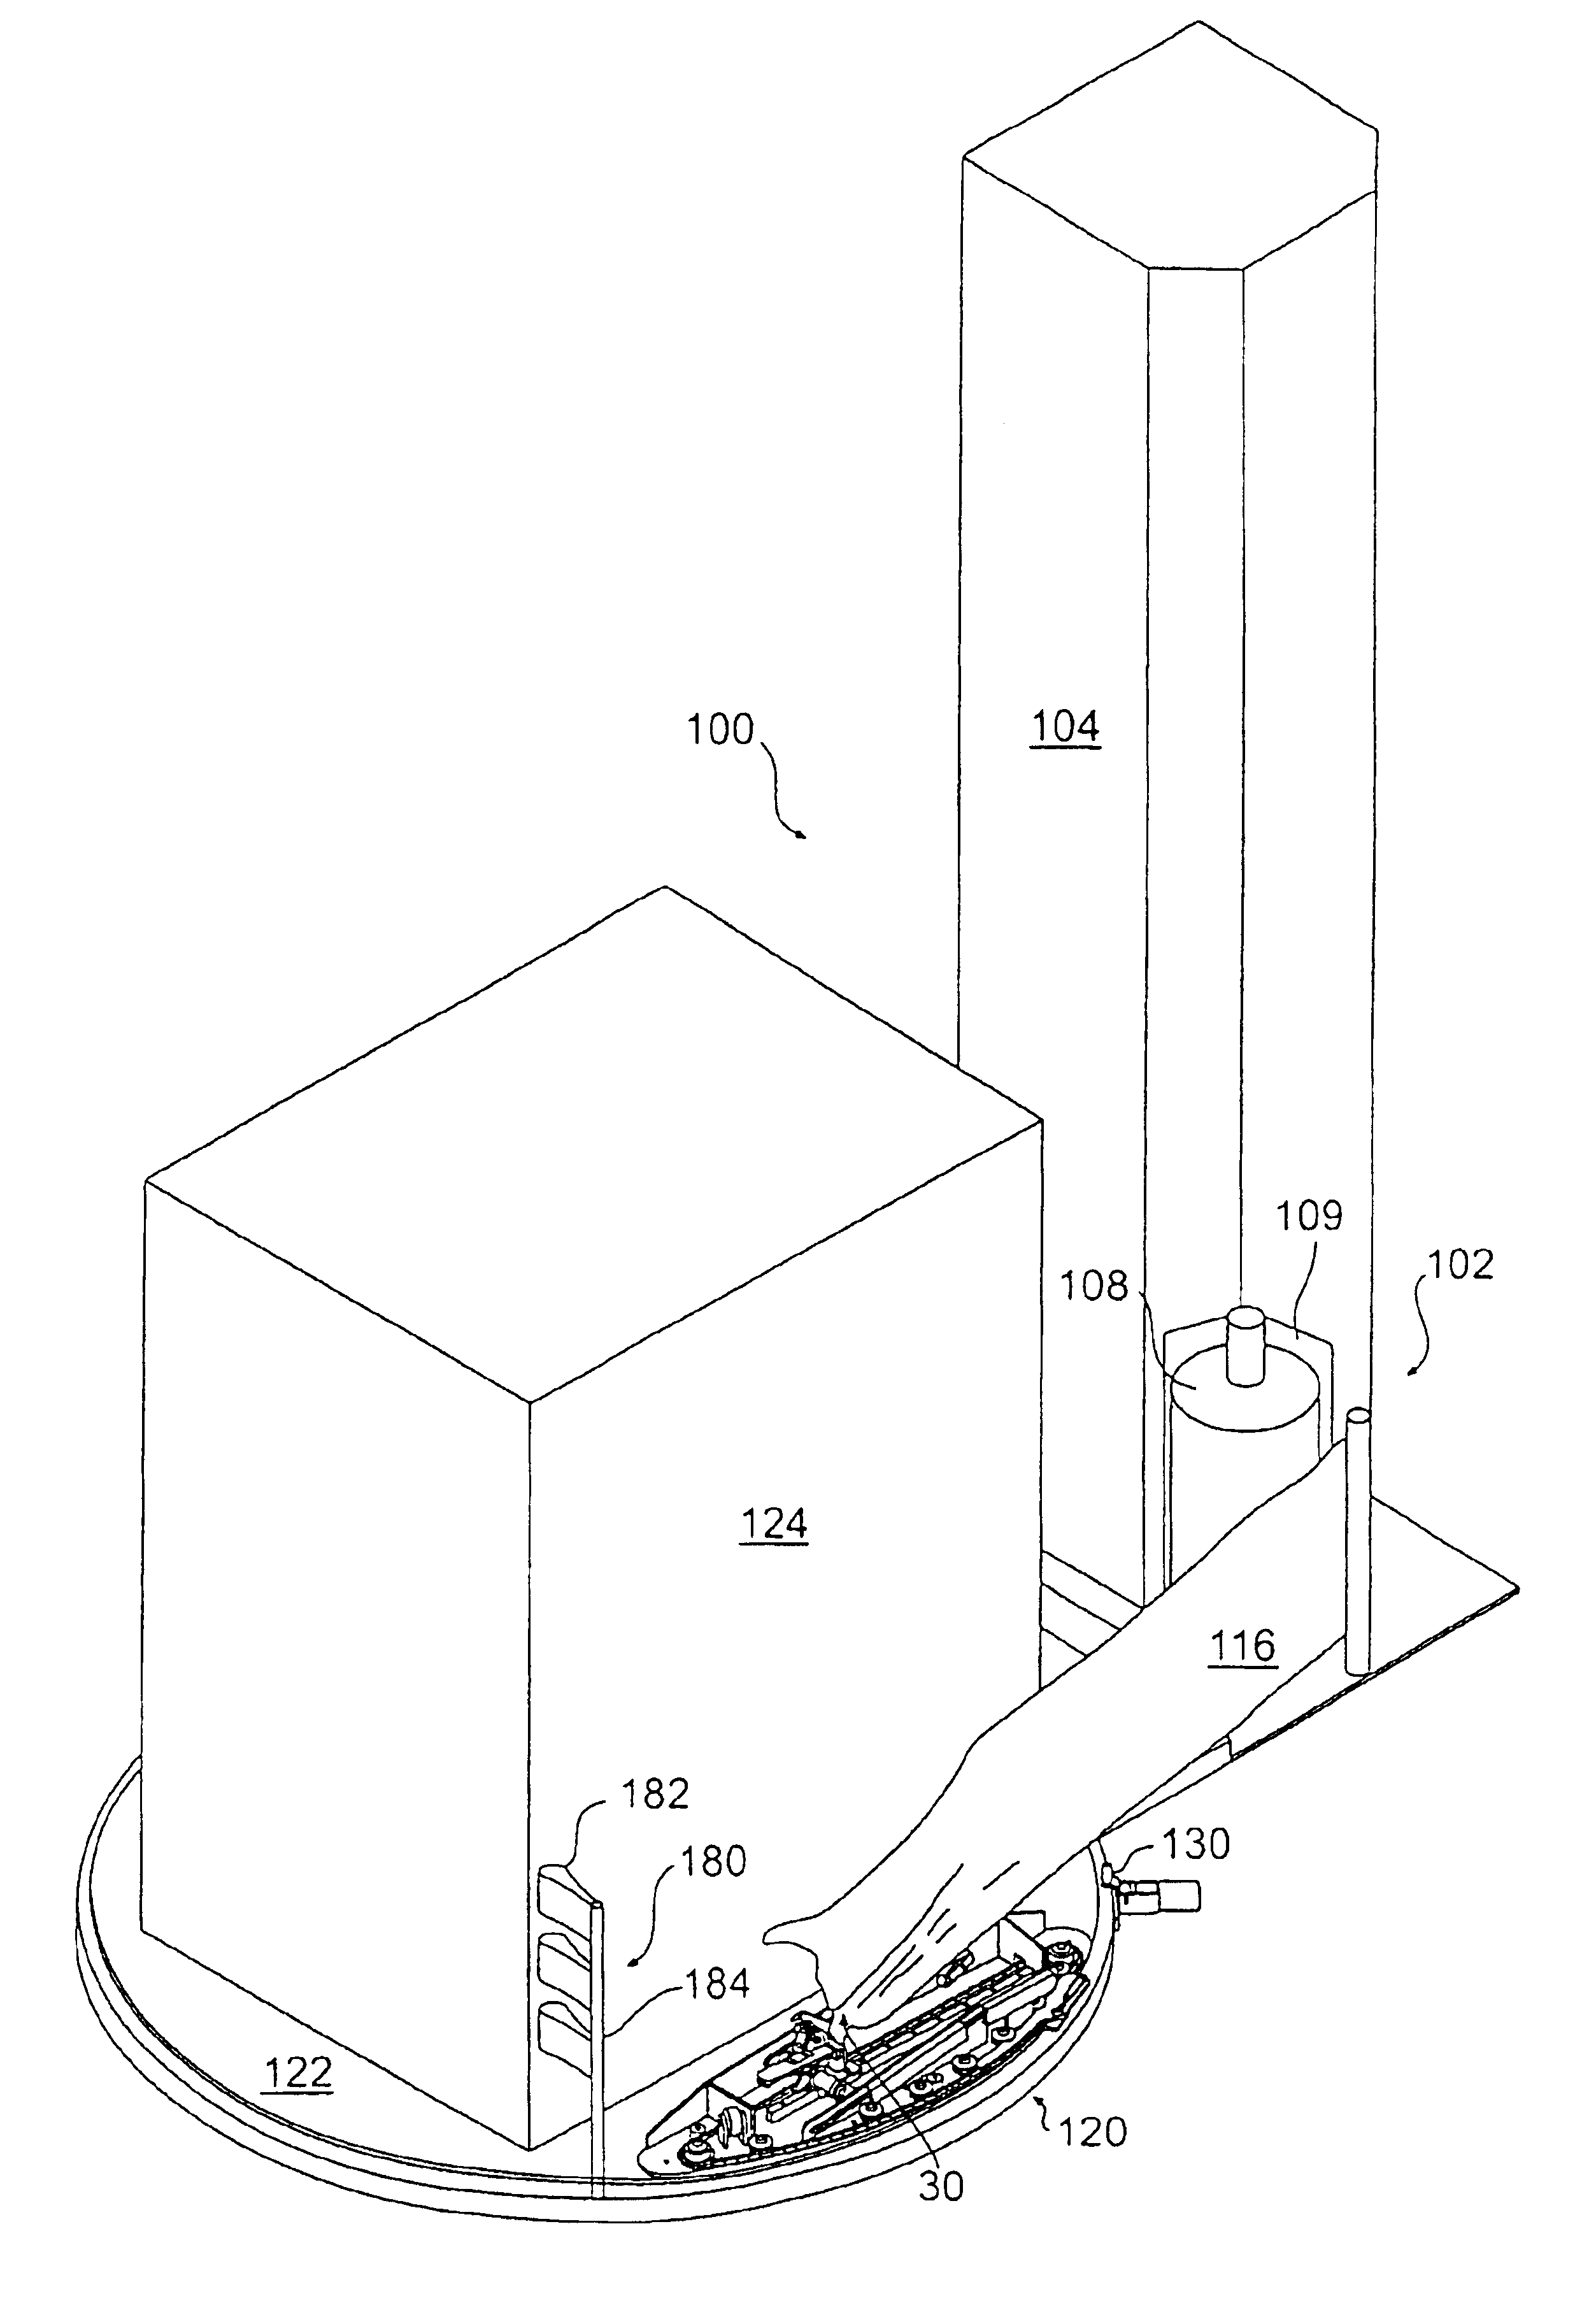 Method and apparatus for stretch wrapping a load